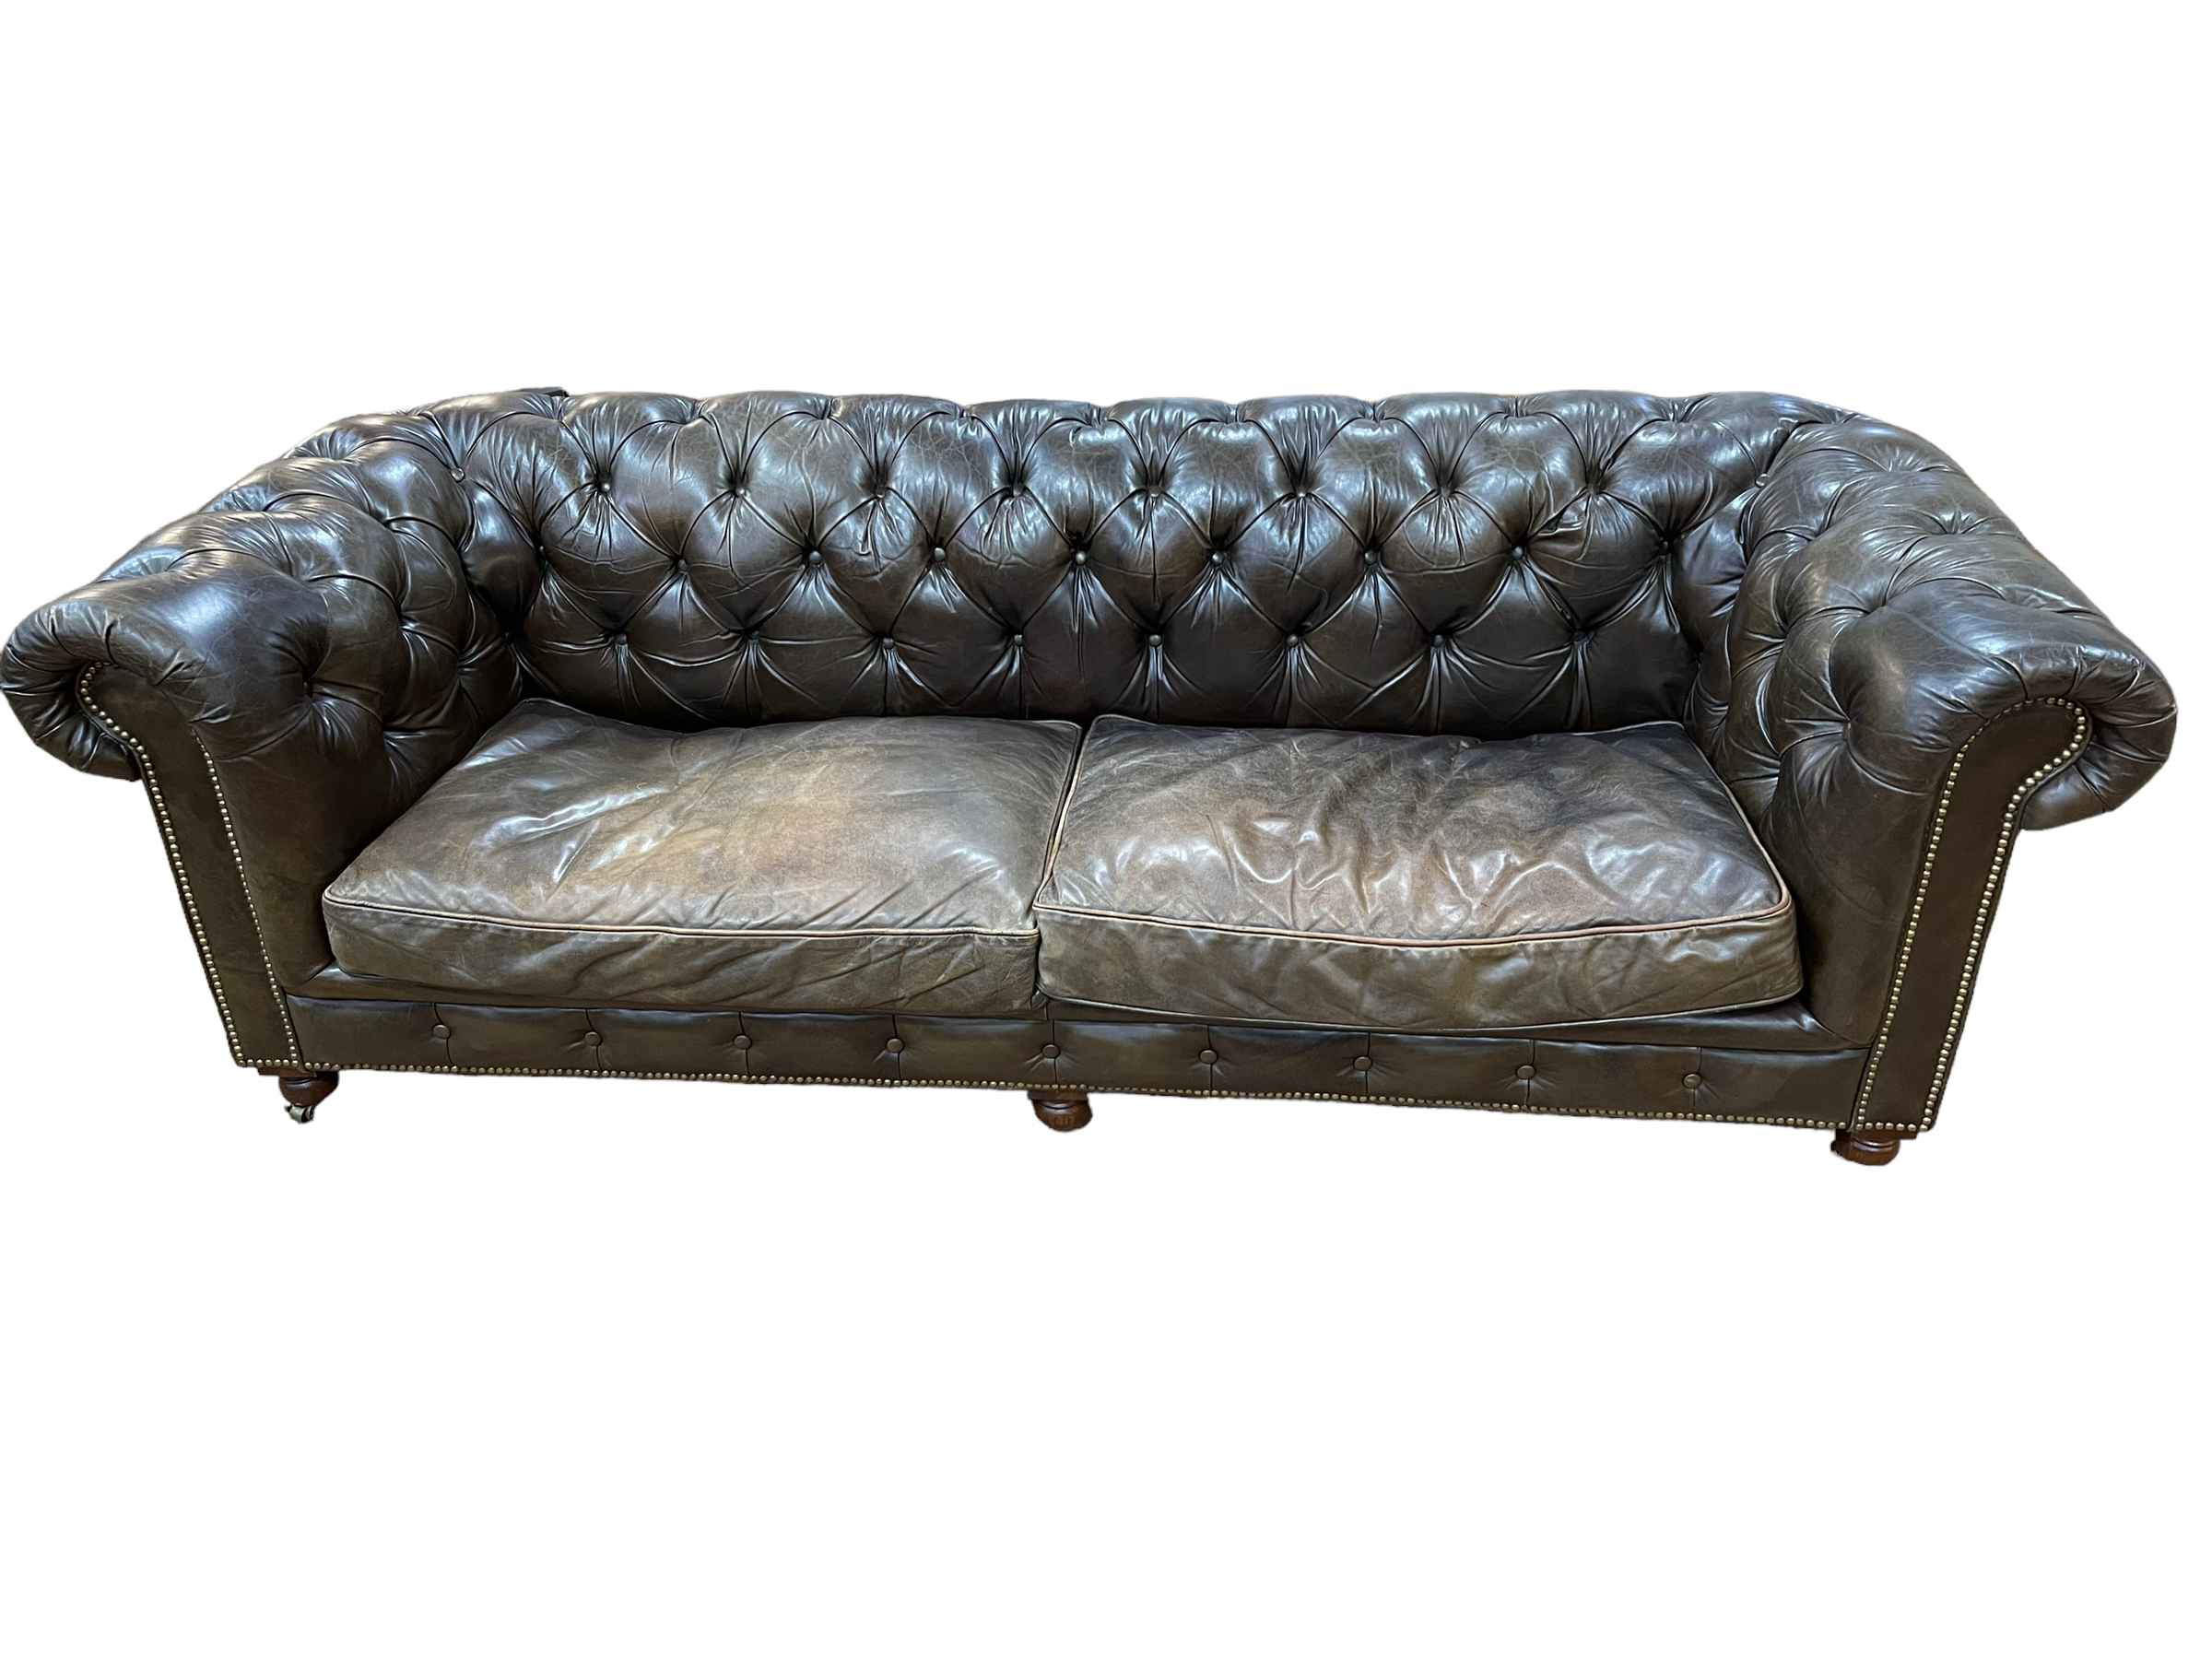 Brown deep buttoned leather and studded Halo Chesterfield settee, 78cm by 240cm by 93cm.